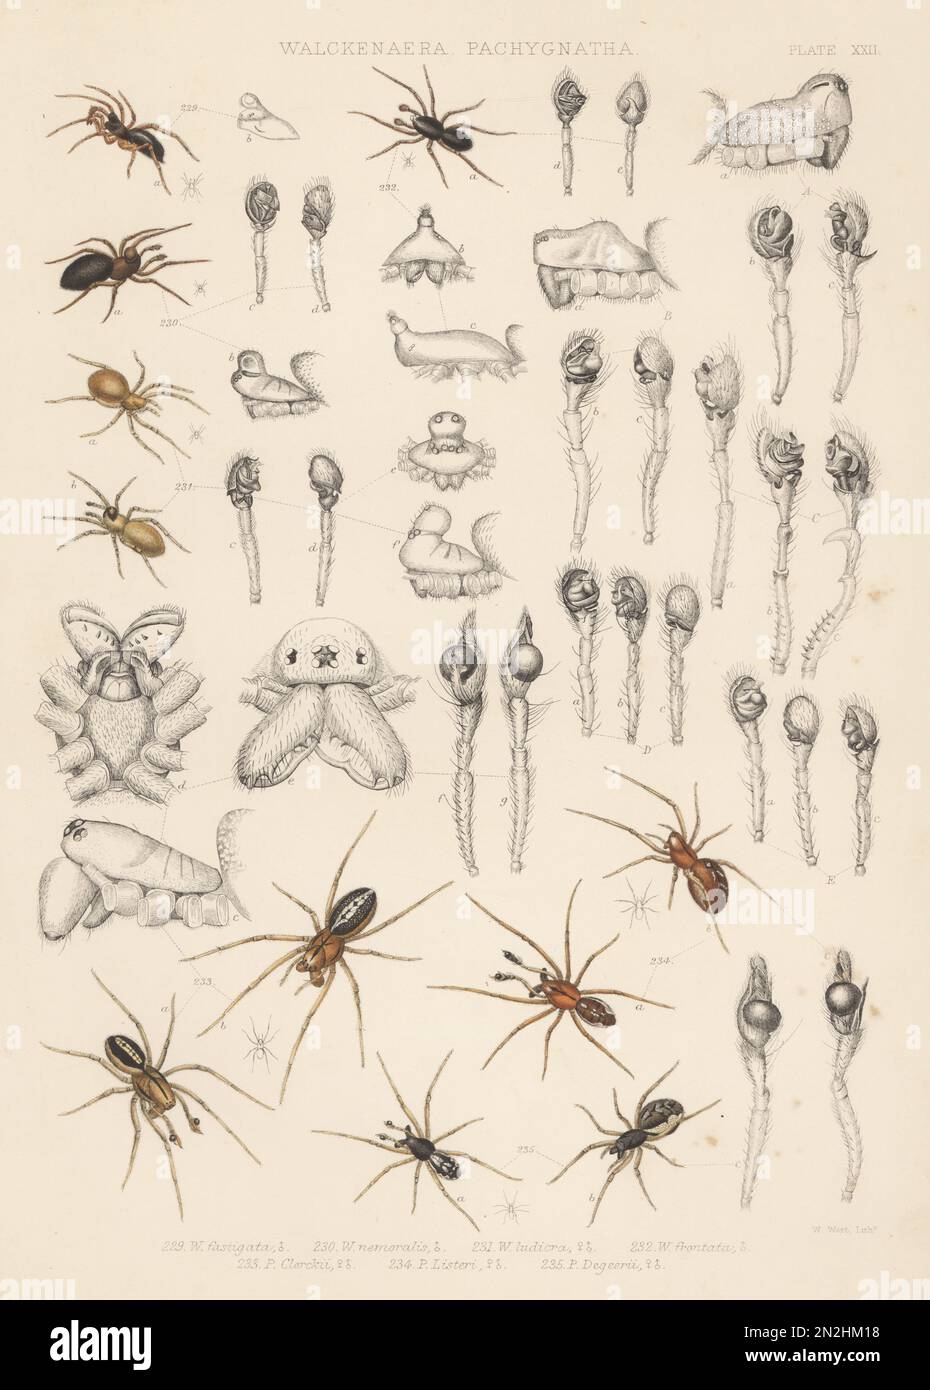 Sheet weaver spider, Trichopterna thorelli 229, dwarf spider, Pelecopsis nemoralis 230, Peponocranium ludicrum 231, Savignia frontata 232, long-jawed orbweavers, Pachygnatha clercki 233, Pachygnatha listeri 234, Pachygnatha degeeri 235, Lophomma punctatum A, Oedothorax gibbosus B, Erigone atra C, Neriene agrestis D, and Oedothorax fuscus E. Handcoloured lithograph by W. West from John Blackwall’s A History of the Spiders of Great Britain and Ireland, Ray Society, London, 1861. Stock Photo